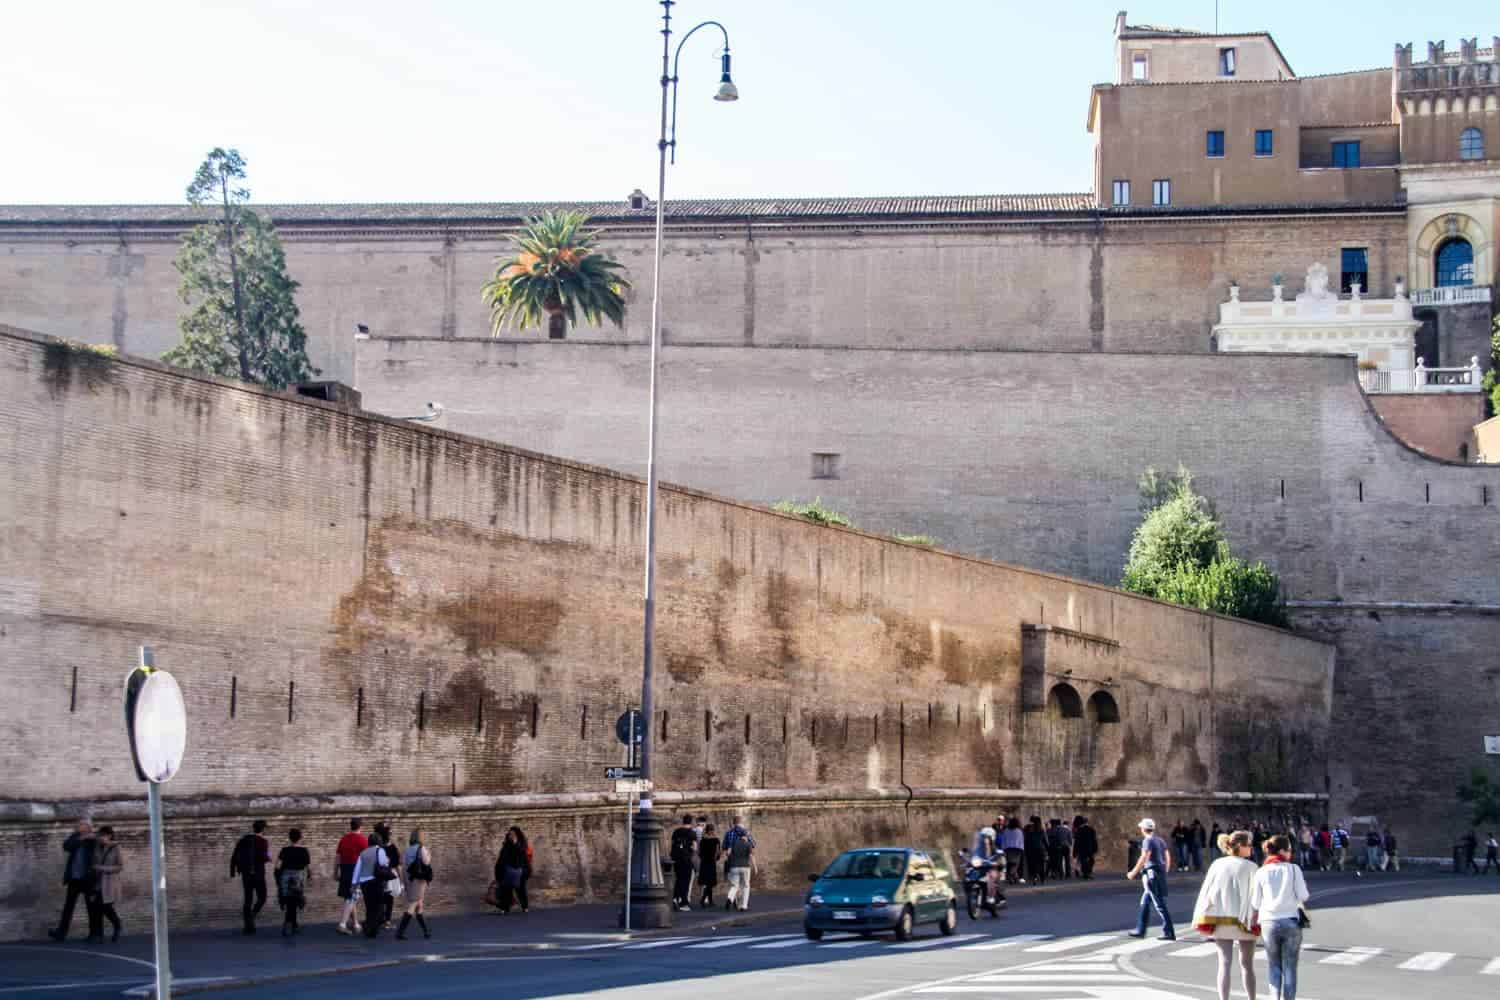 The Vatican City Walls in Rome when visiting the museum